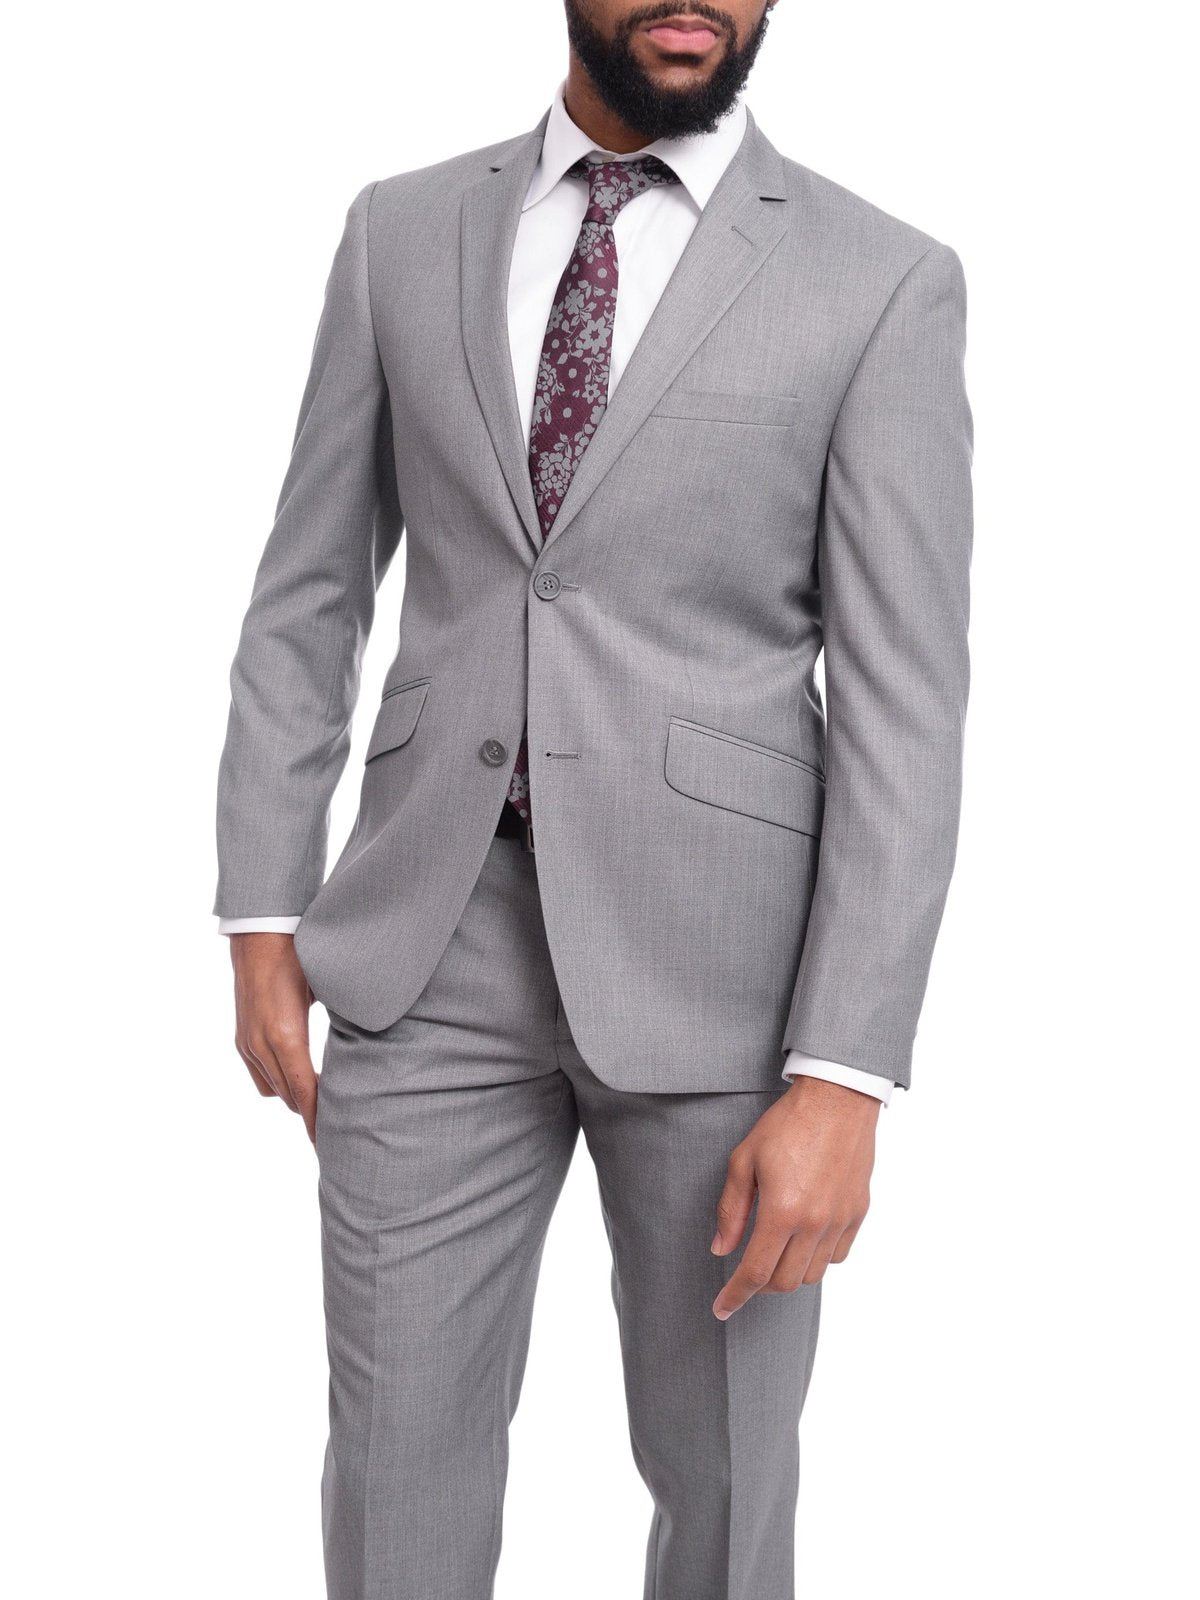 Boys Suit in Gray for boys of all ages